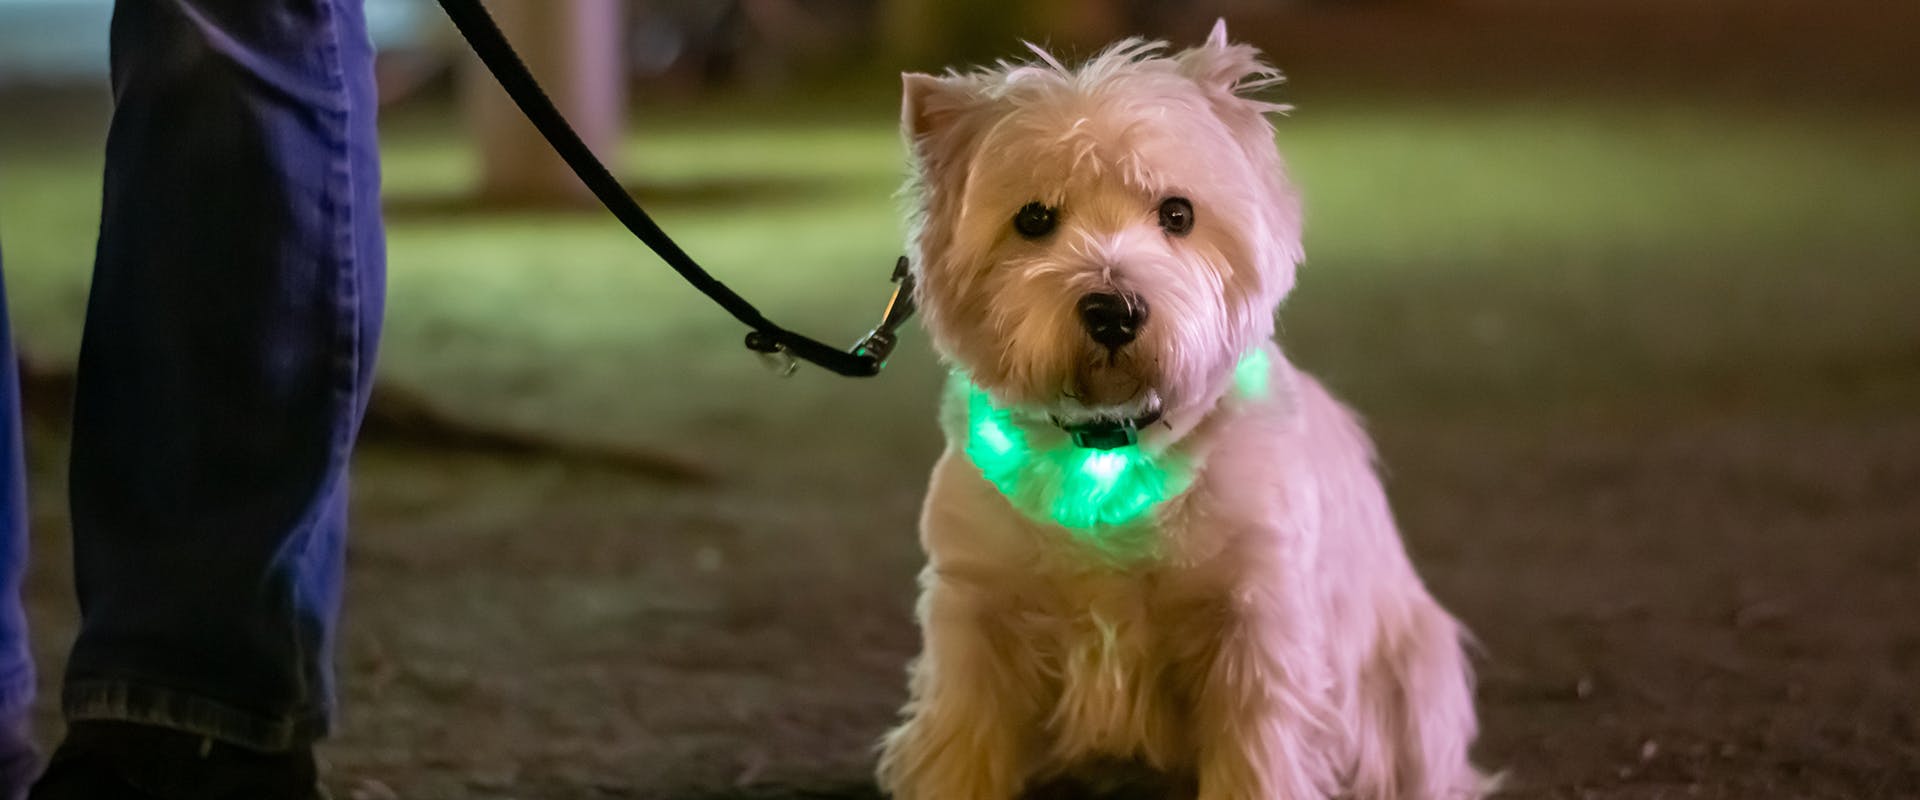 A small dog out on a nighttime walk, wearing a dog collar with light